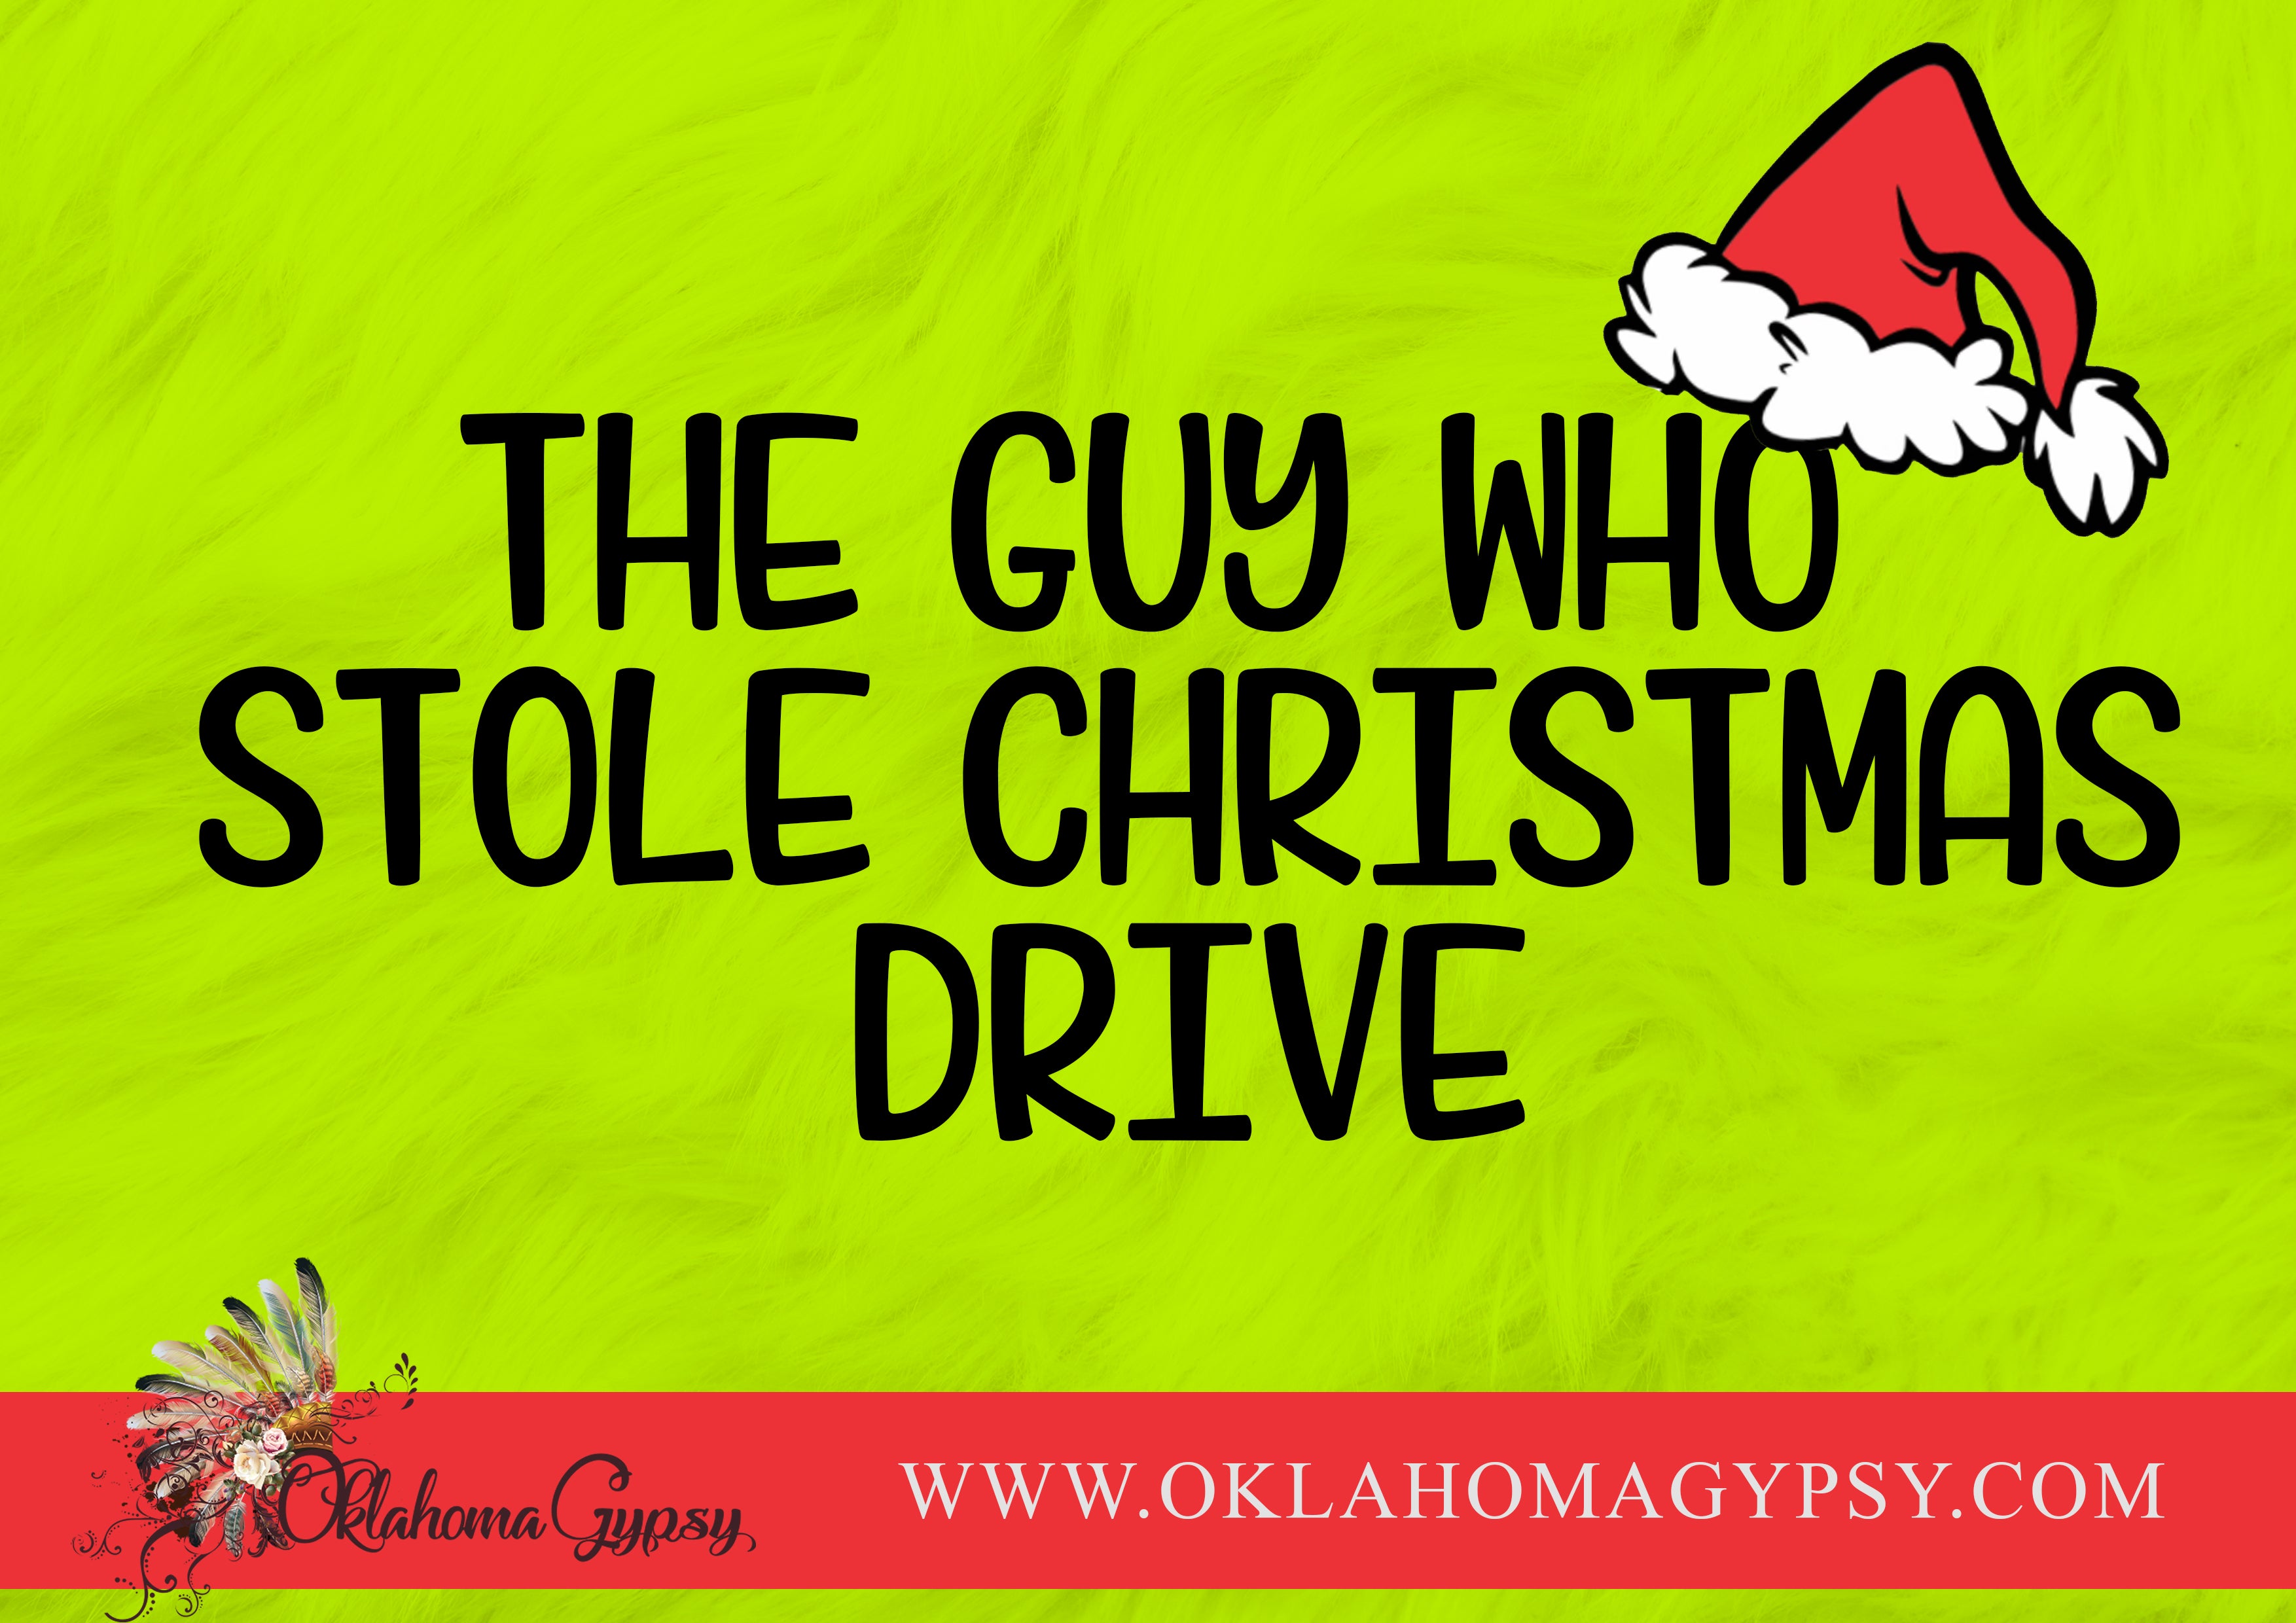 The Guy Who Stole Christmas Drive